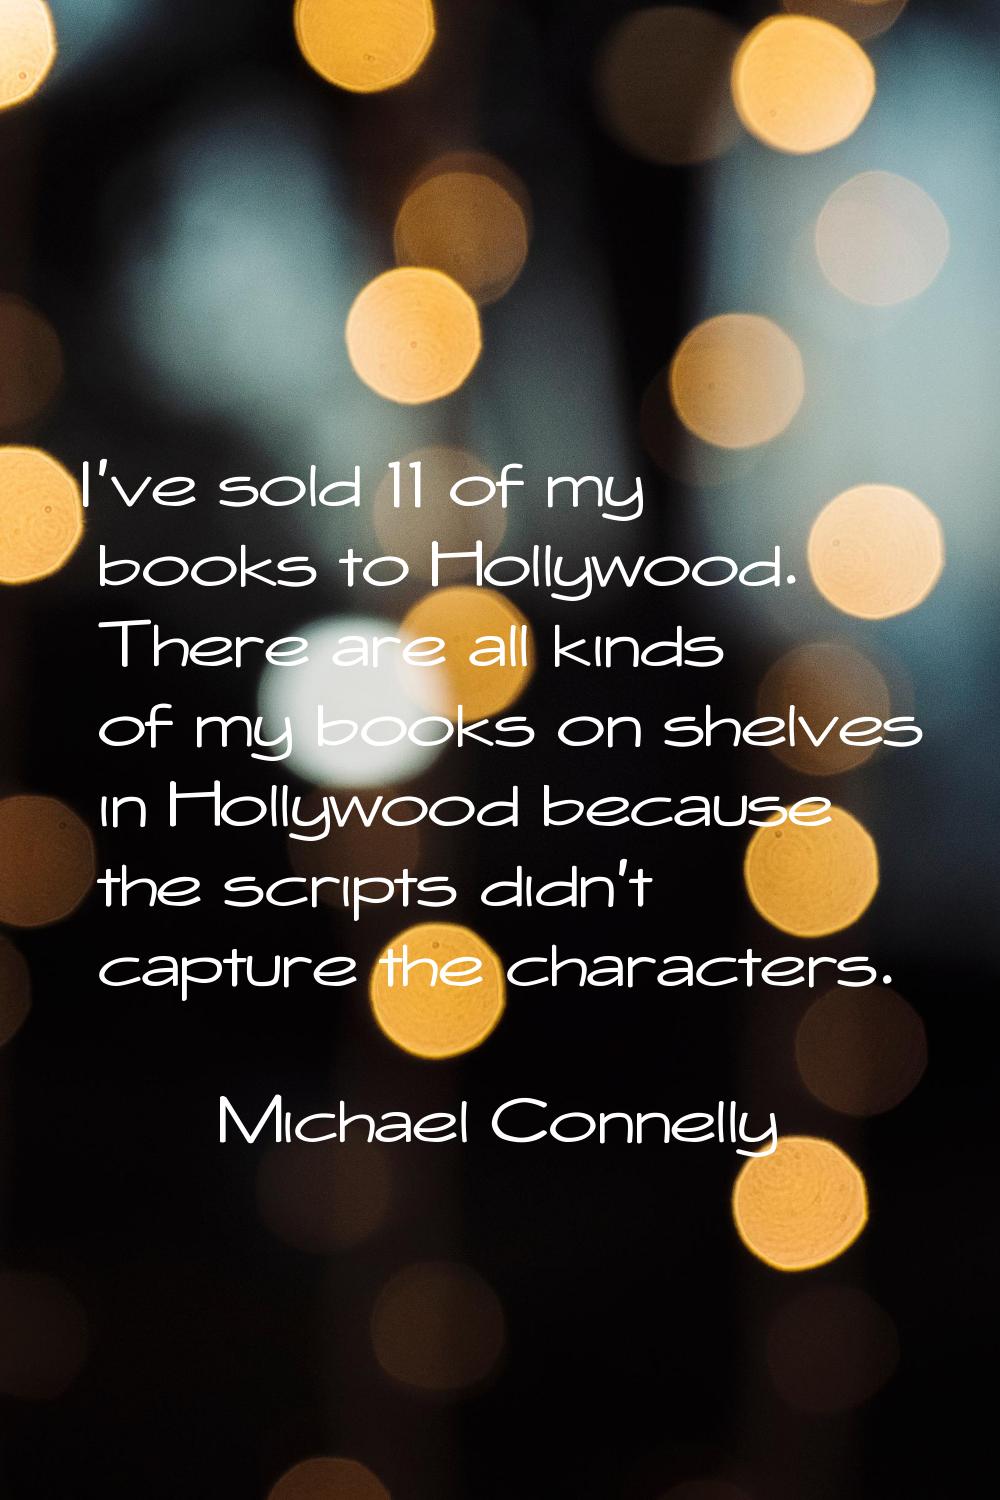 I've sold 11 of my books to Hollywood. There are all kinds of my books on shelves in Hollywood beca